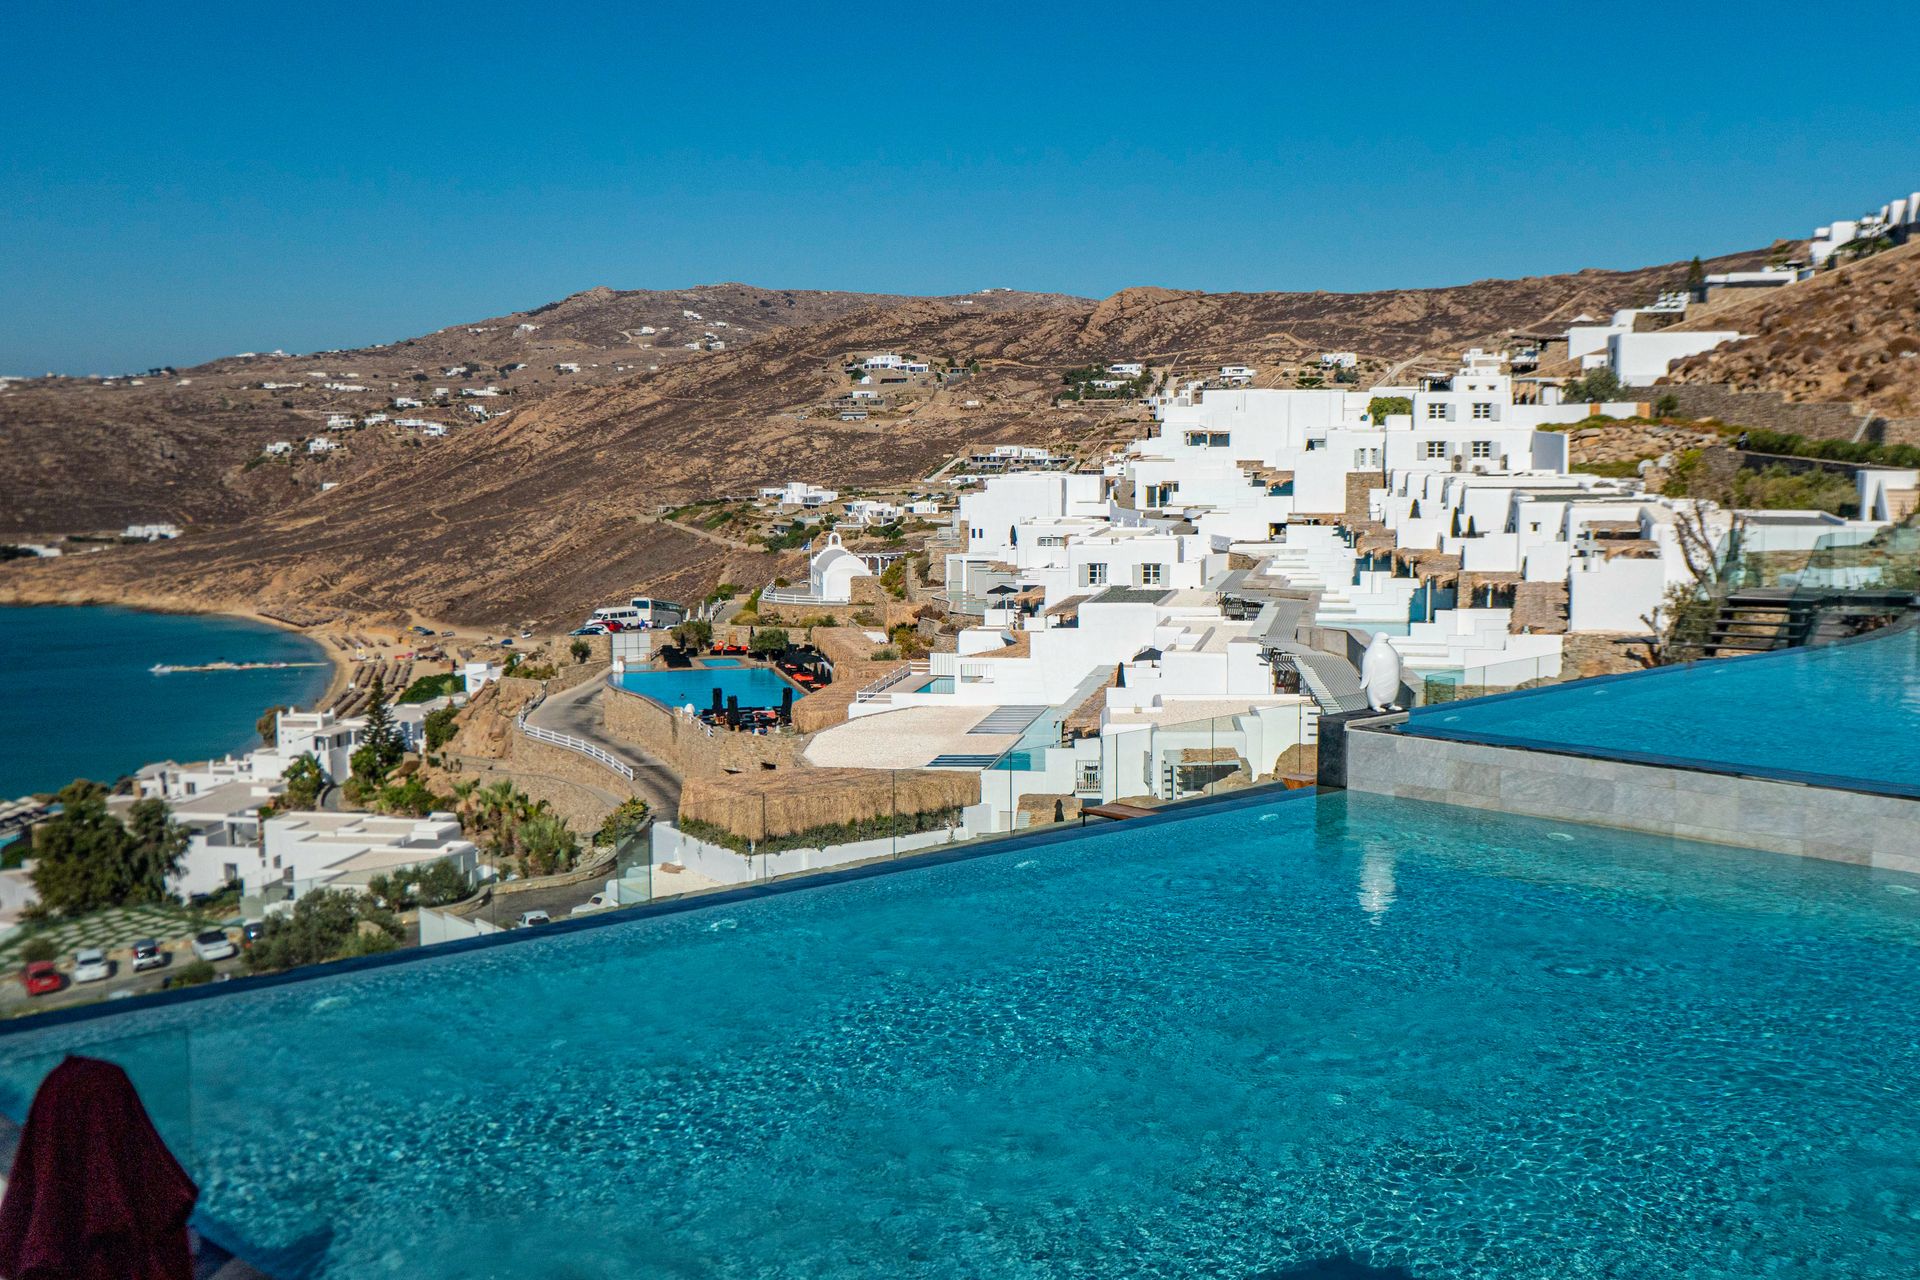 <p>If you want to party all night long, then Mykonos is the perfect destination for you in Greece. The island is known for its wild parties and for always being an LGBT-friendly place.</p>